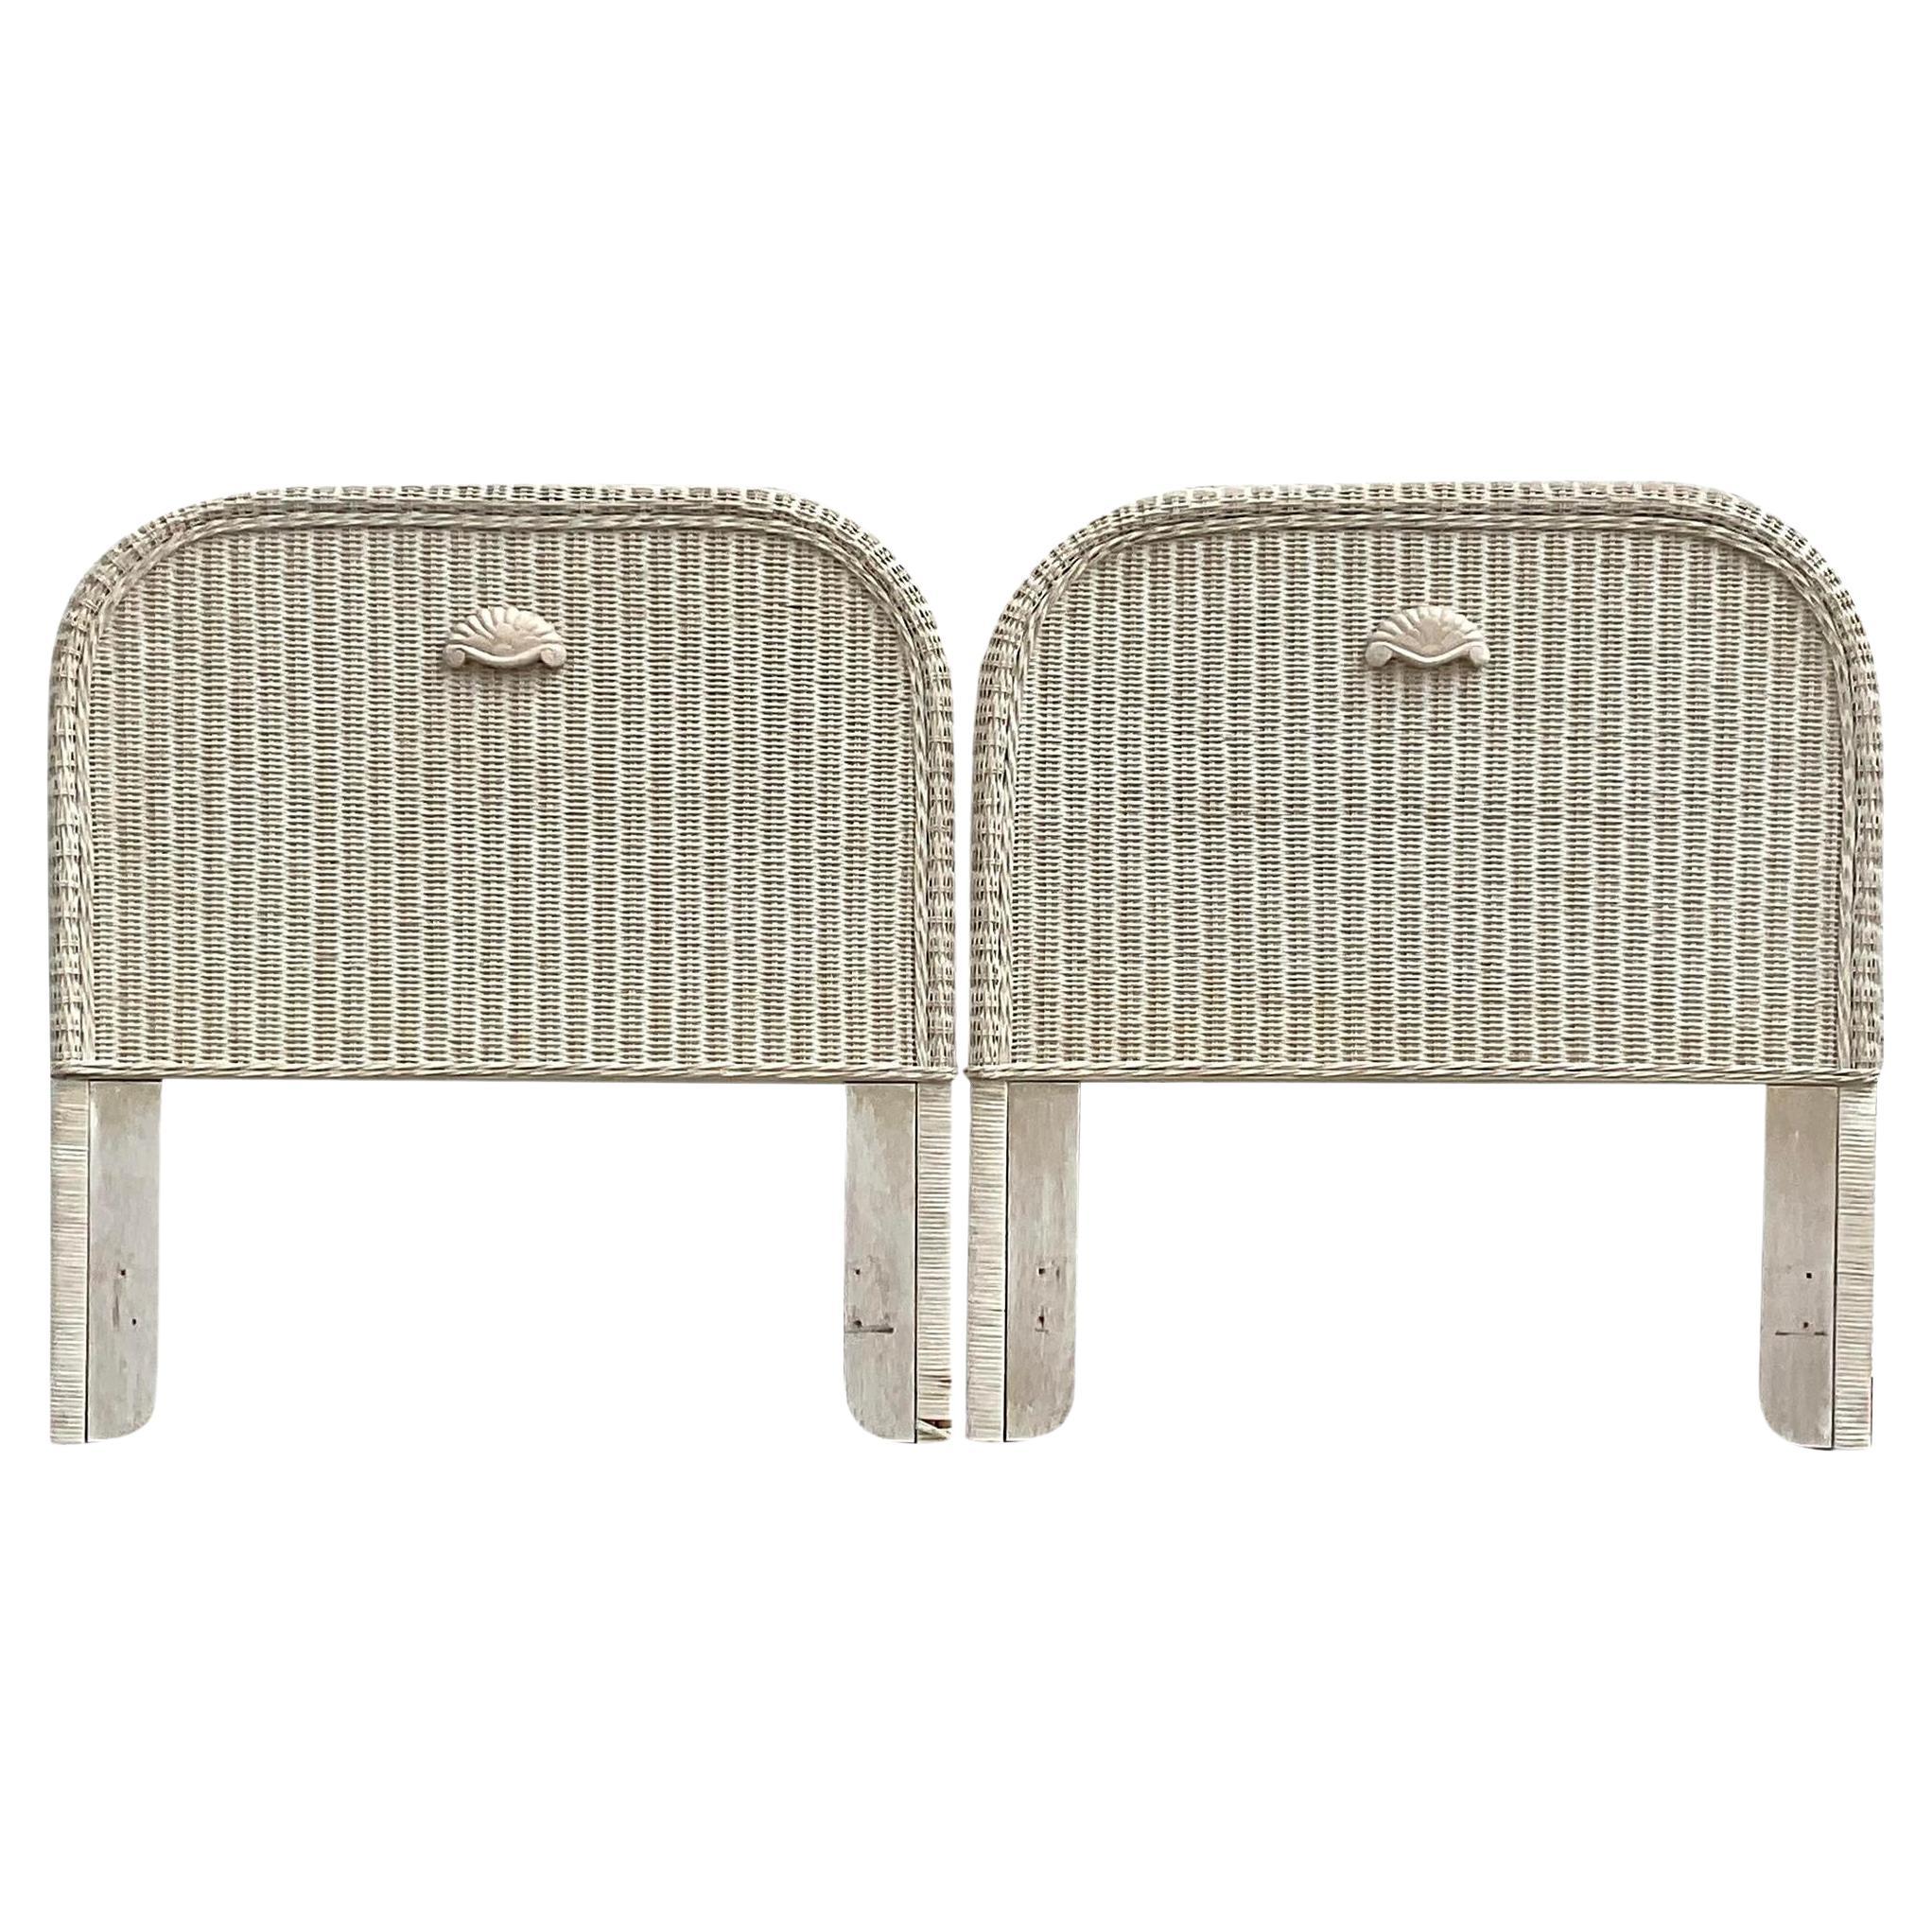 Vintage Coastal Woven Rattan Twin Headboards - a Pair For Sale